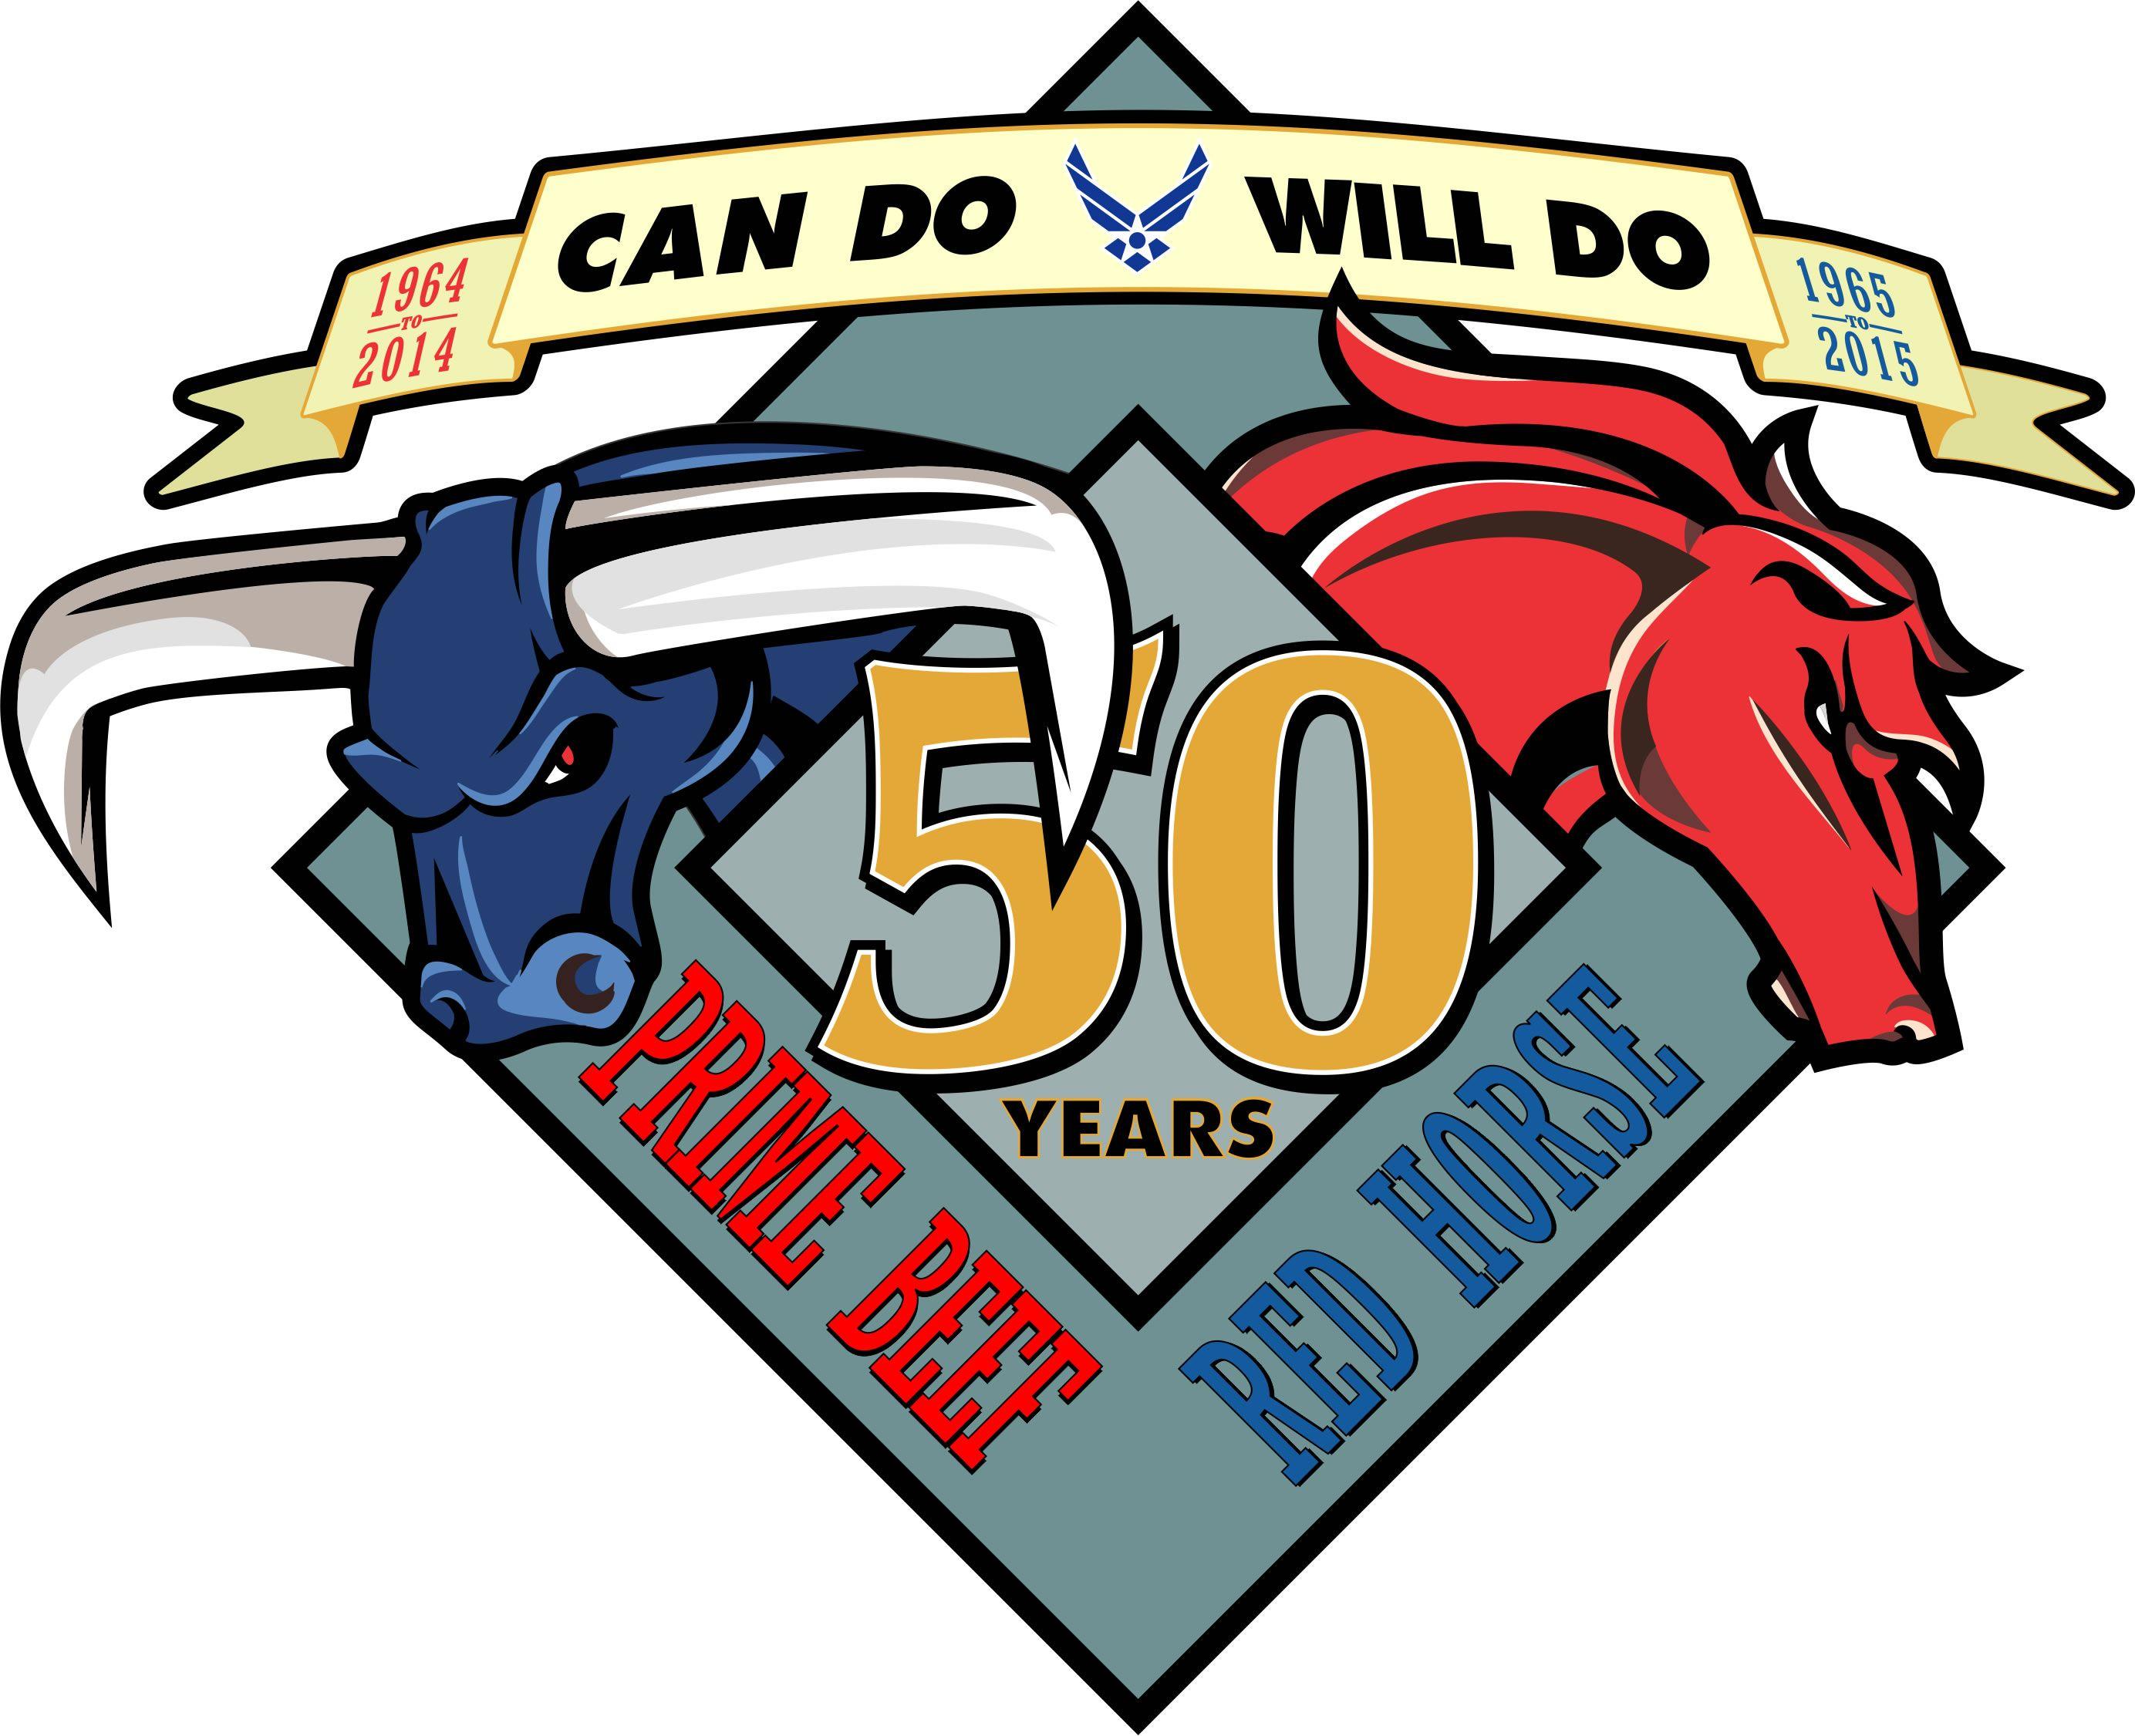 Red Horse Air Logo - 50 Years of Can Do Will Do